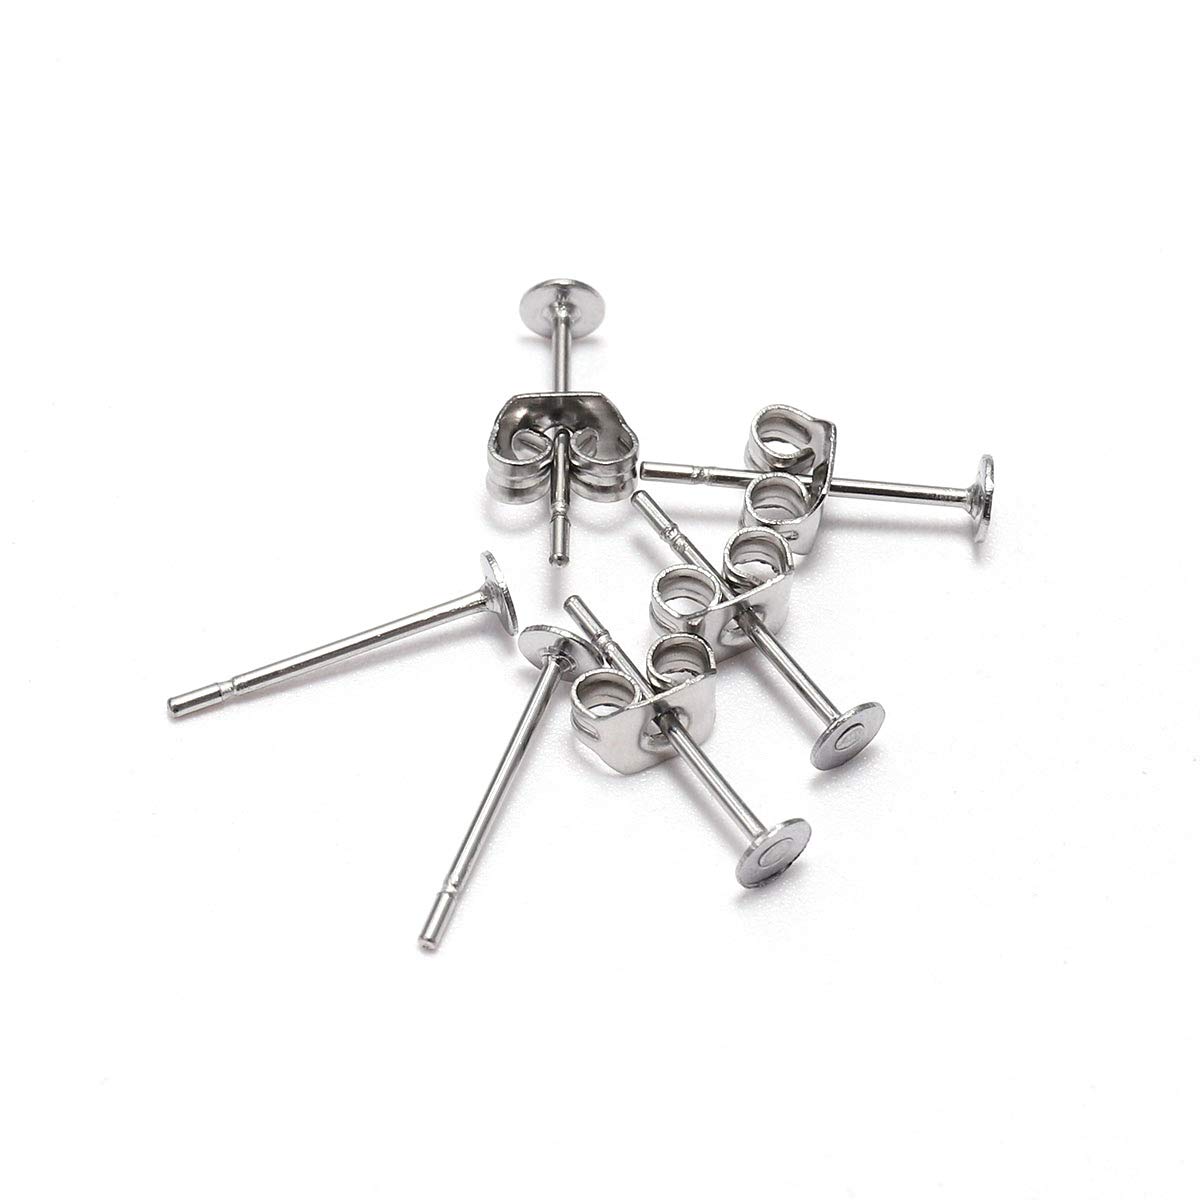 100pcs/lot Stainless Steel Blank Post Earring Studs Base Pins with Stainless Steel Butterfly Earring Backs Earrings Accessories for DIY Jewelry Making (Stainless Steel-100pcs, 3mm)